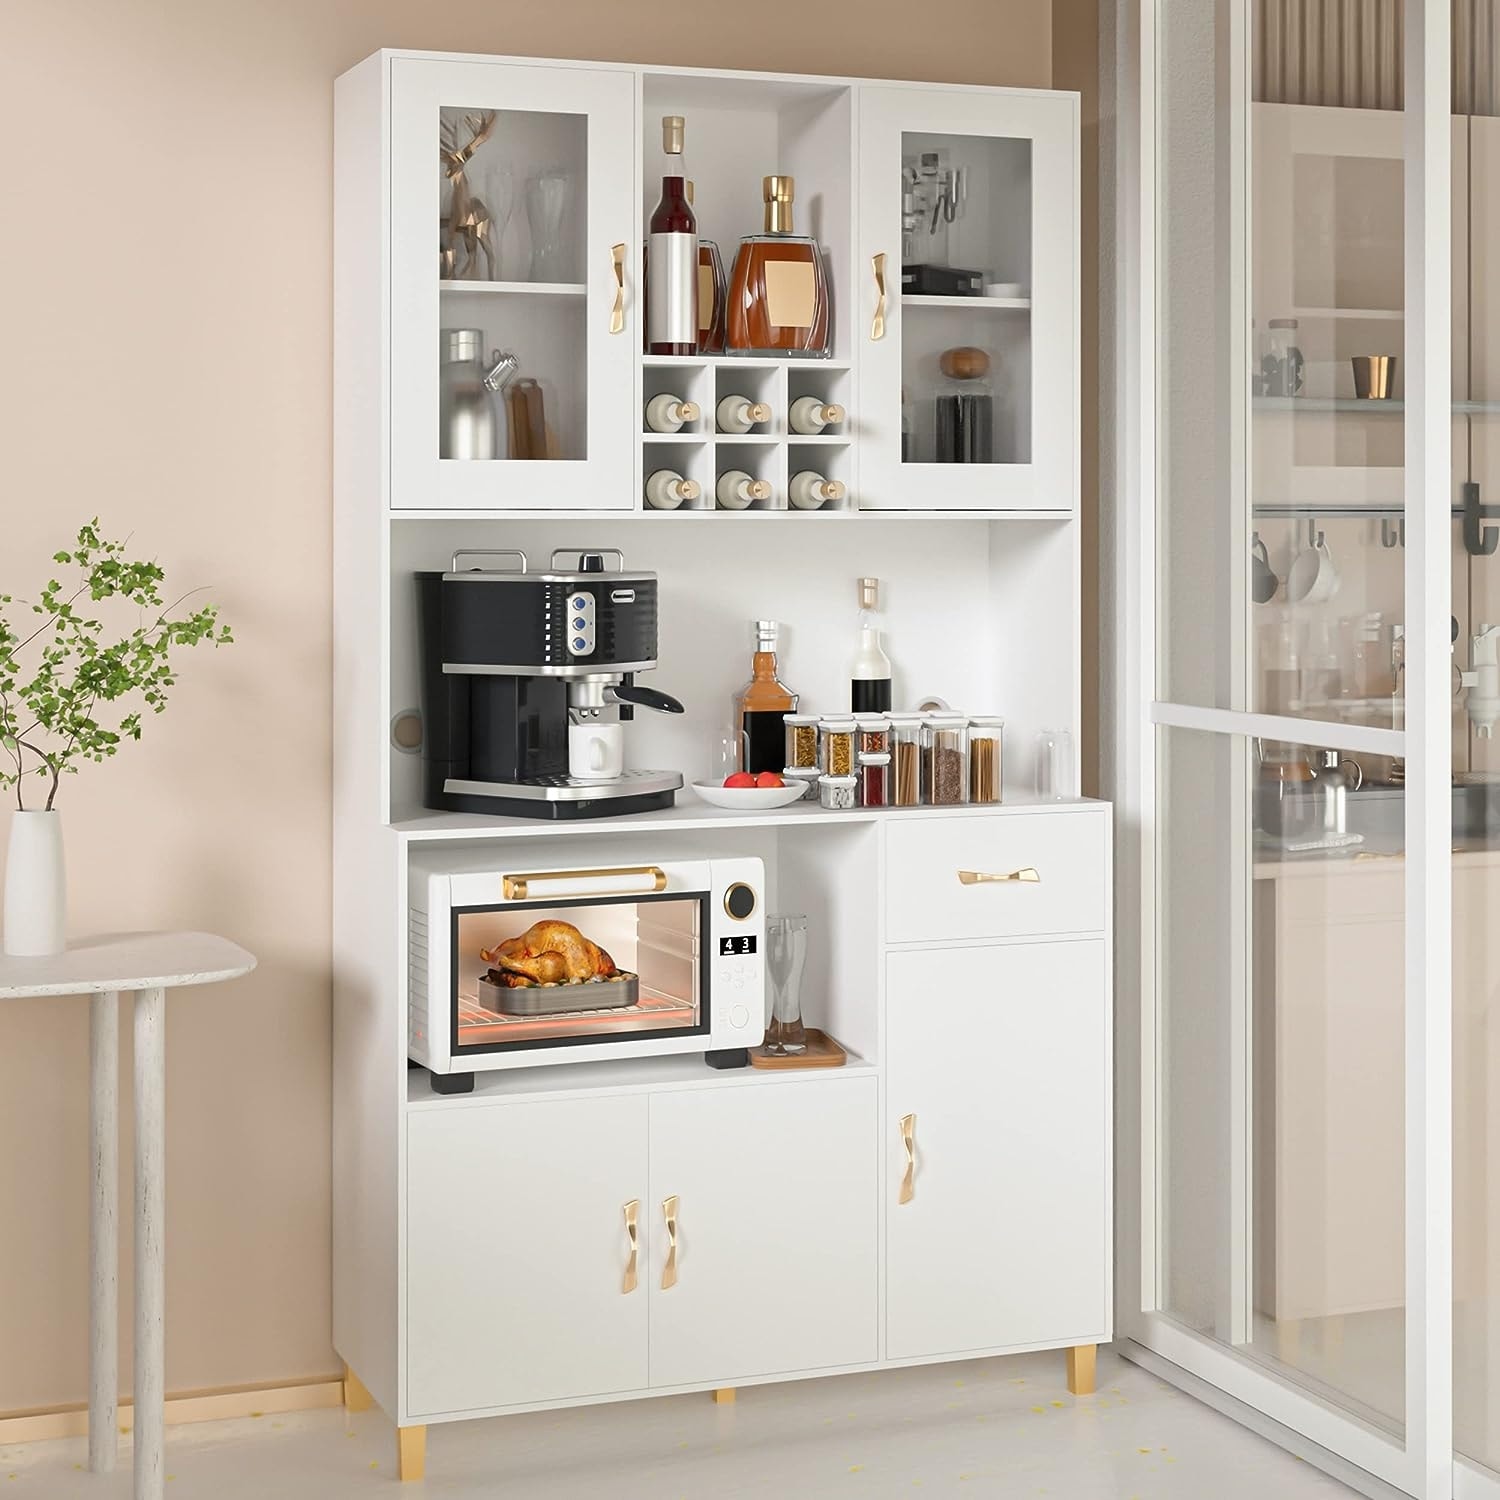 https://ak1.ostkcdn.com/images/products/is/images/direct/915e5dde0aab4a4c2827ab76d208b8fe275d9e2c/PAKASEPT-Kitchen-Pantry-Storage-Cabinet%2CModern-Freestanding-Pantry-Cabinet.jpg